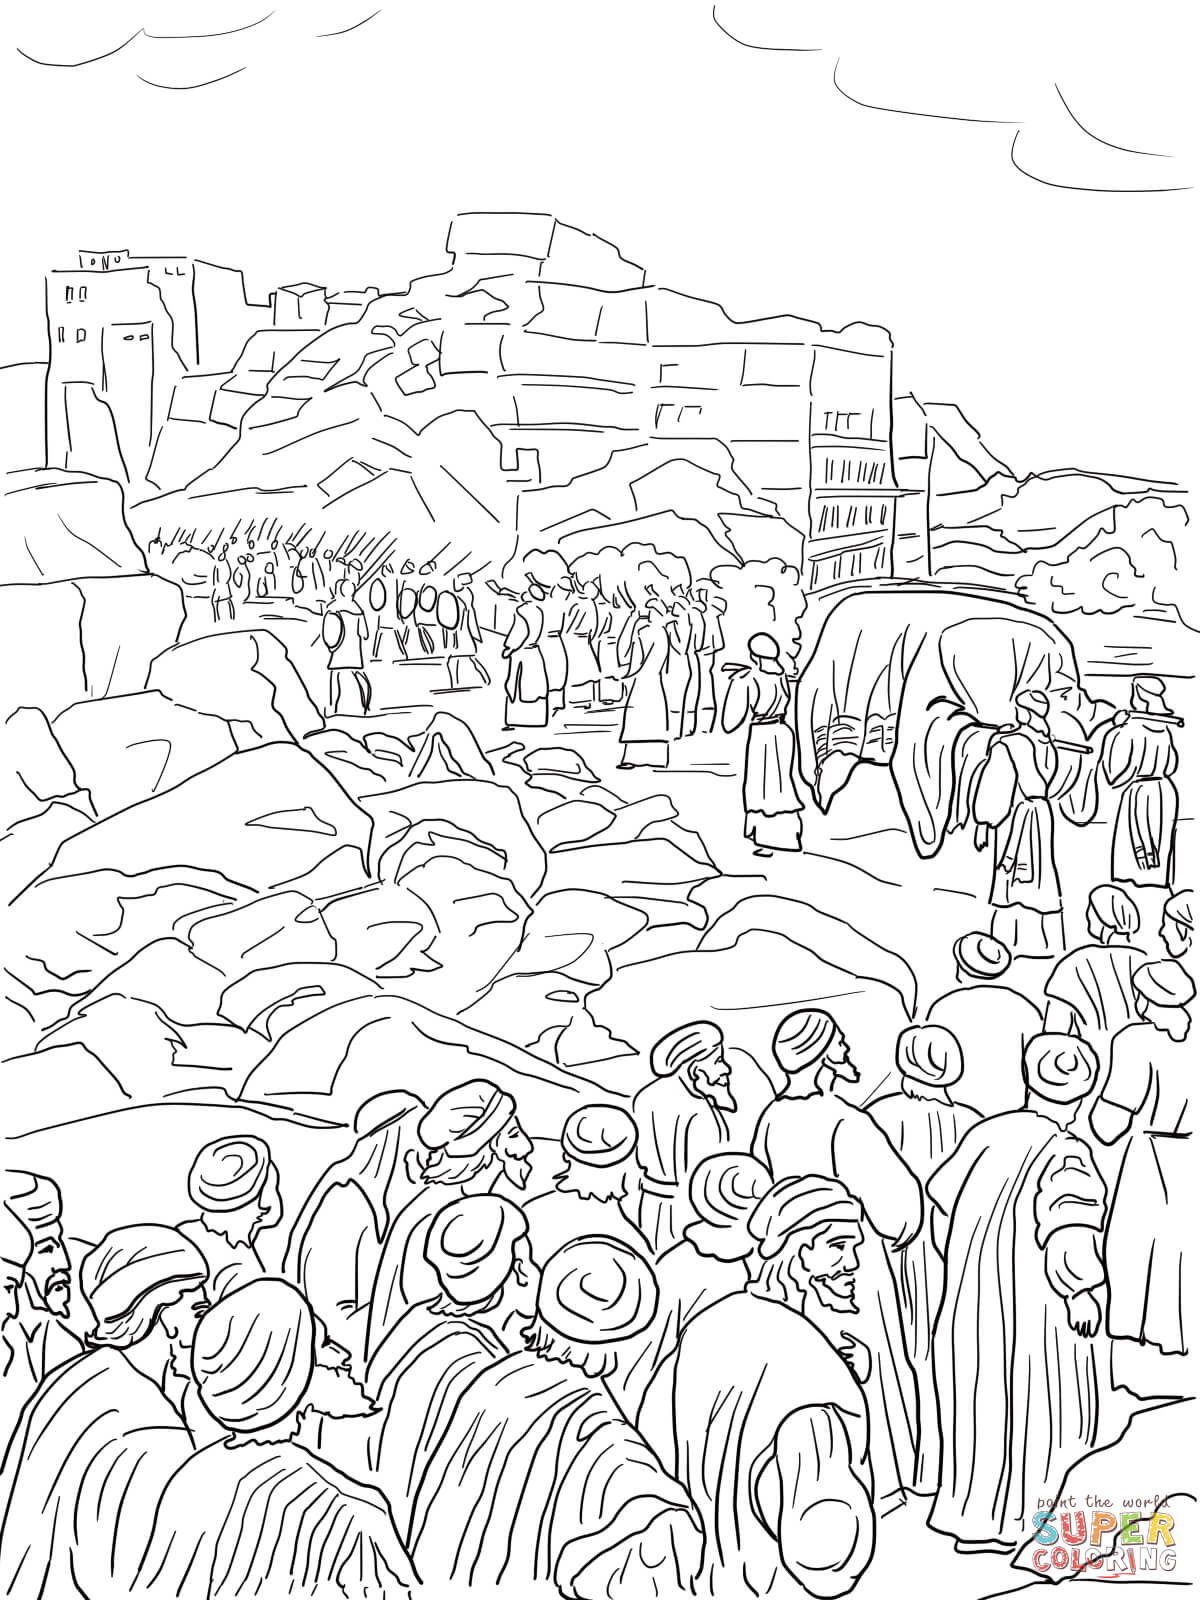 Crossing The Jordan River Coloring Pages - Coloring Home